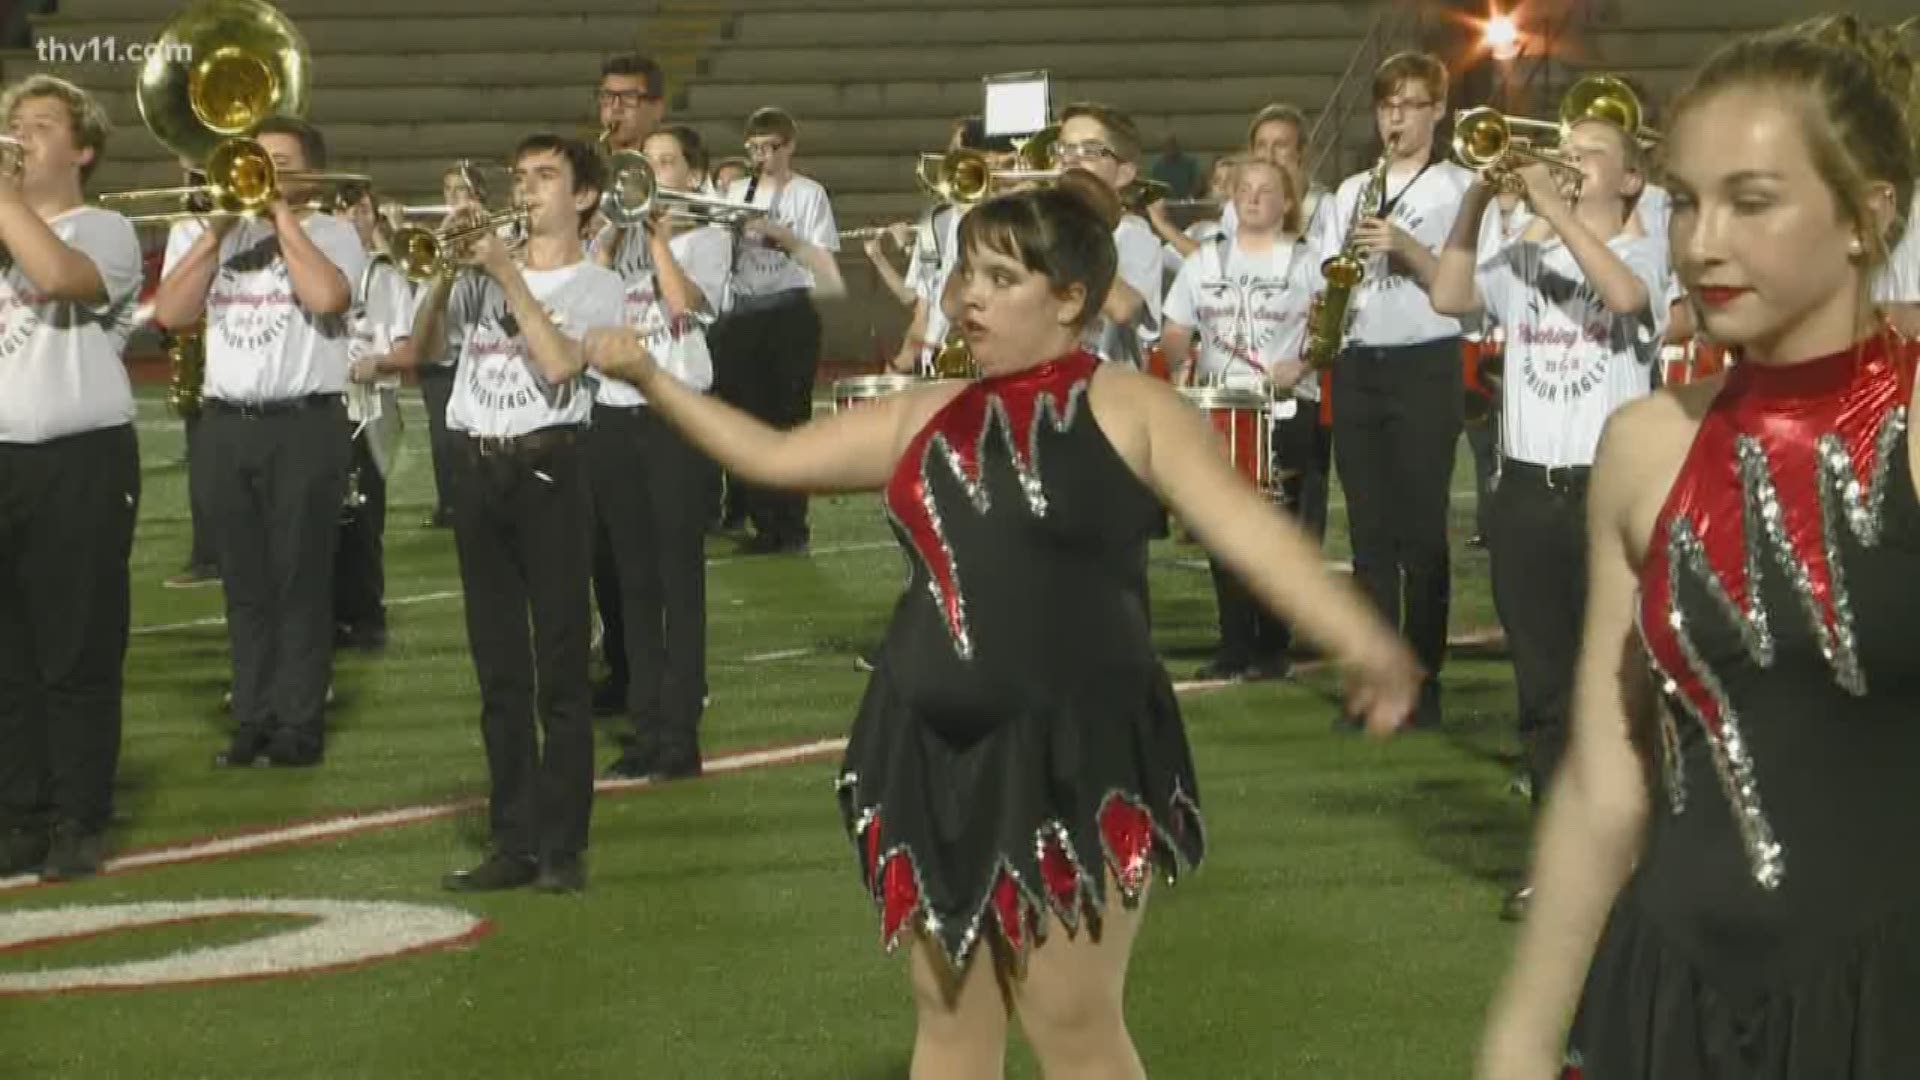 A high schooler with autism is breaking down barriers by proving she can do anything, including twirl for her middle school band.